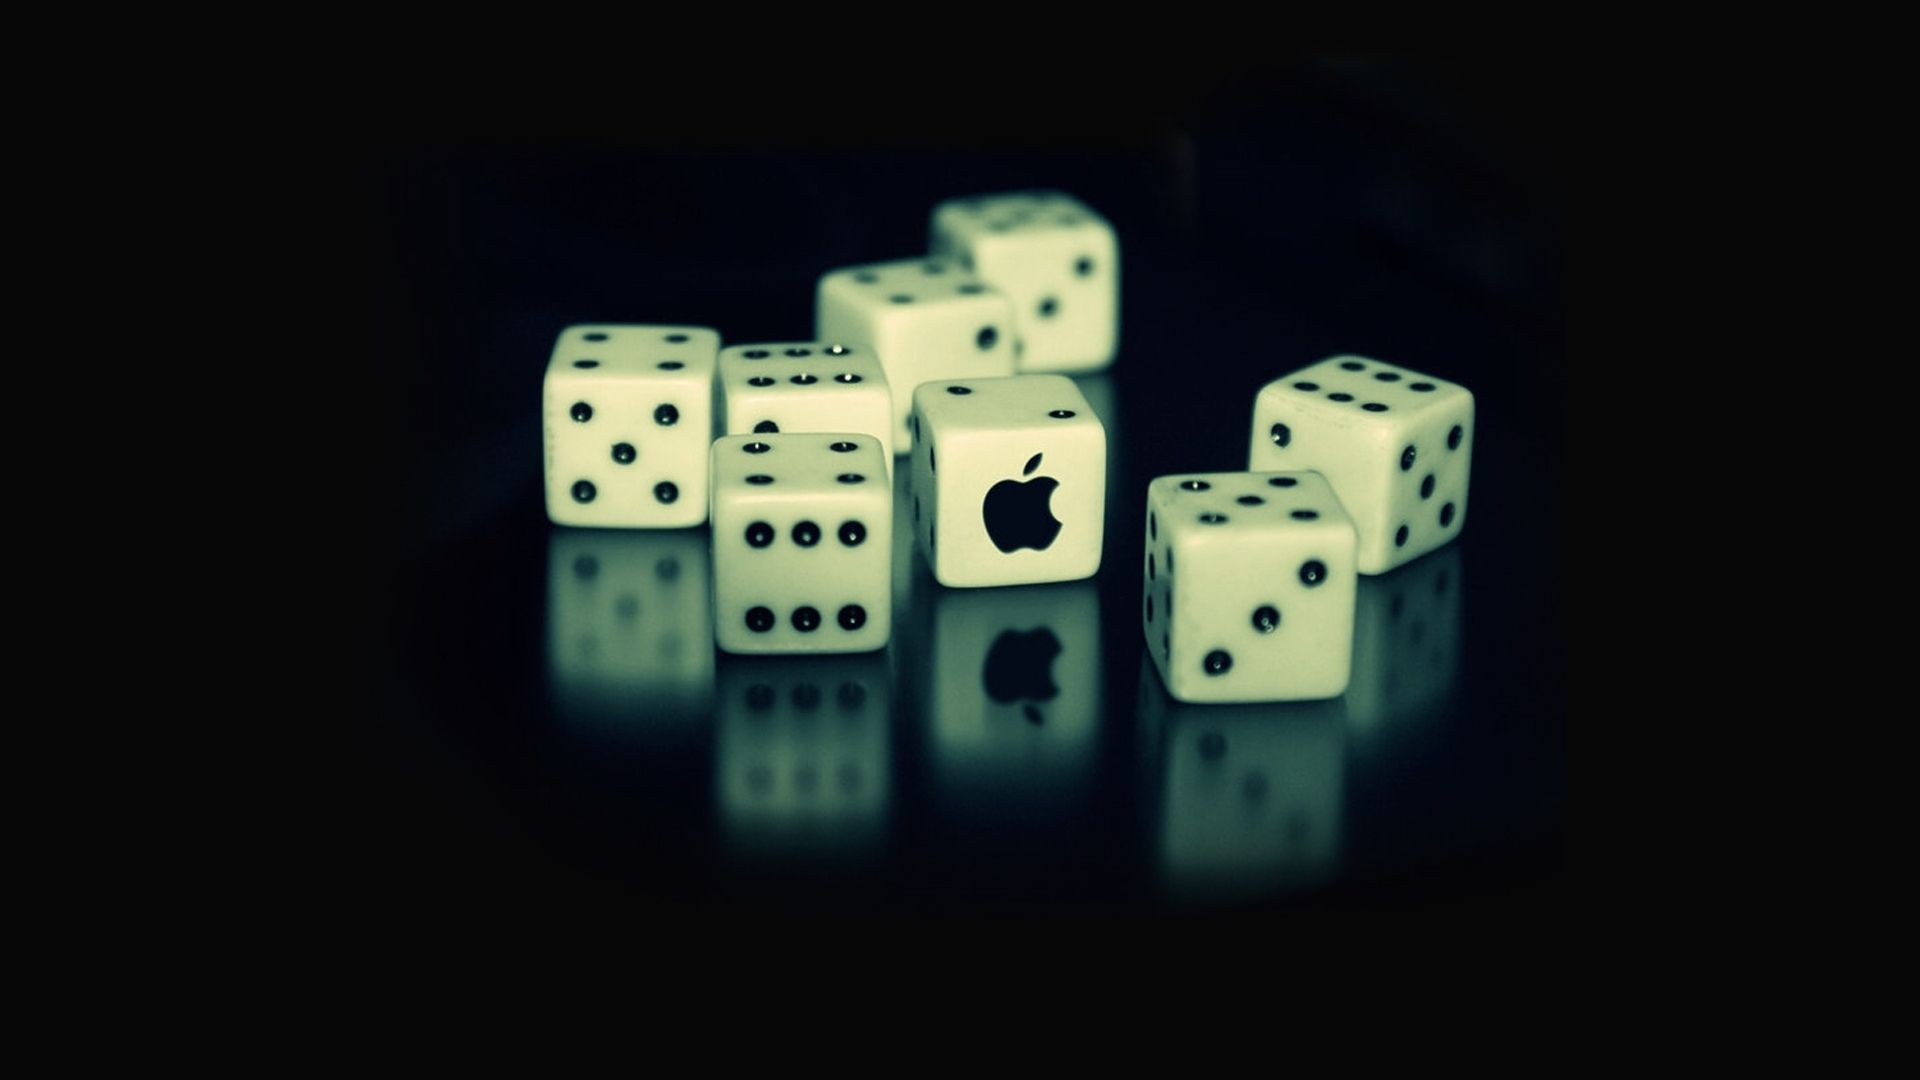 Dices And Apple Dices Mac Wallpaper Download | Free Mac Wallpapers ...